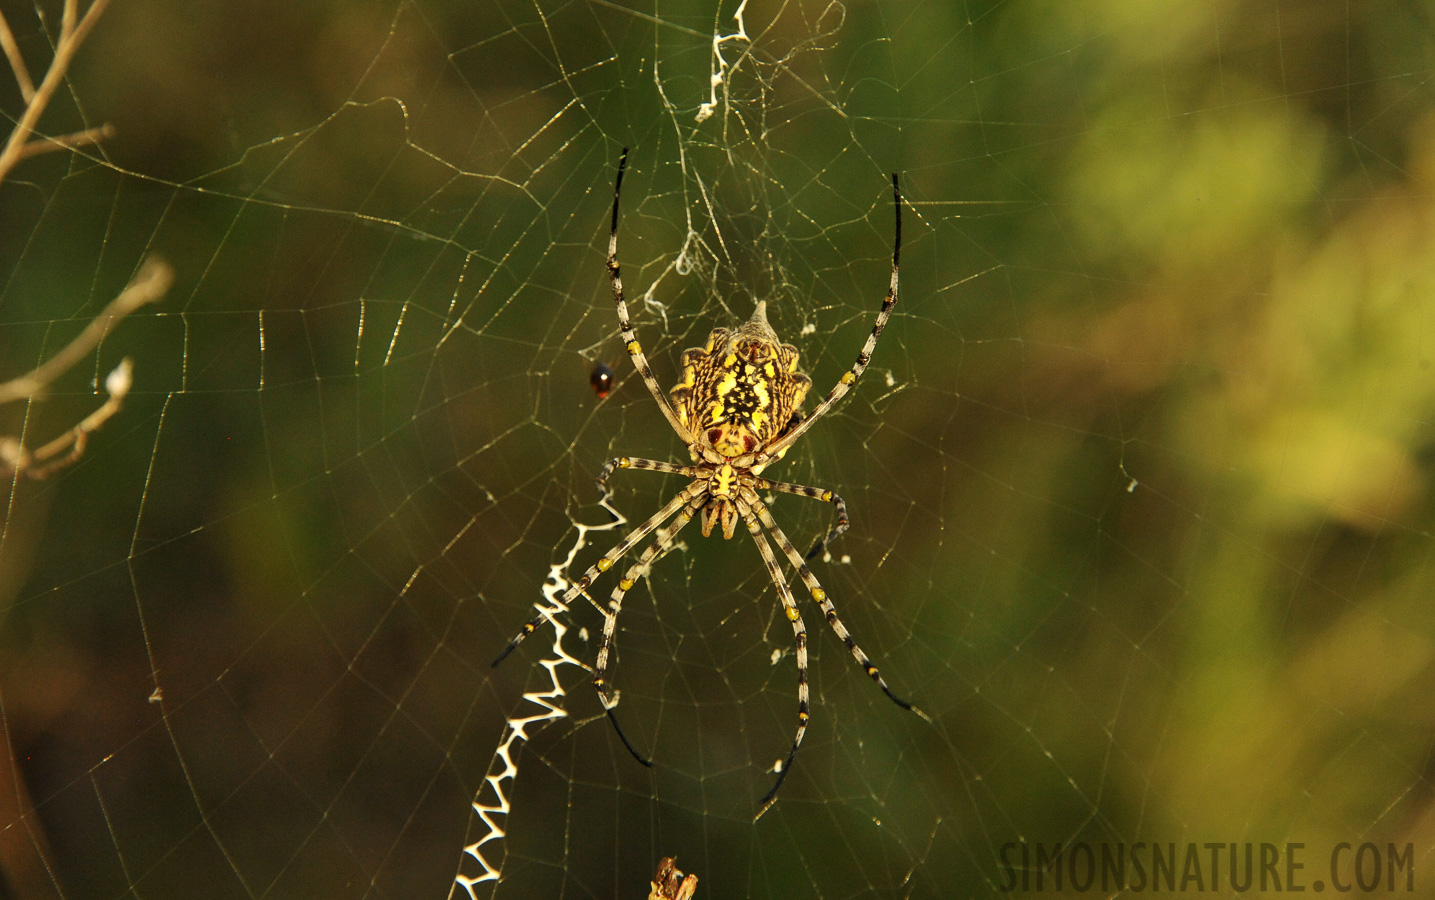 Argiope sp [300 mm, 1/1600 sec at f / 8.0, ISO 2500]